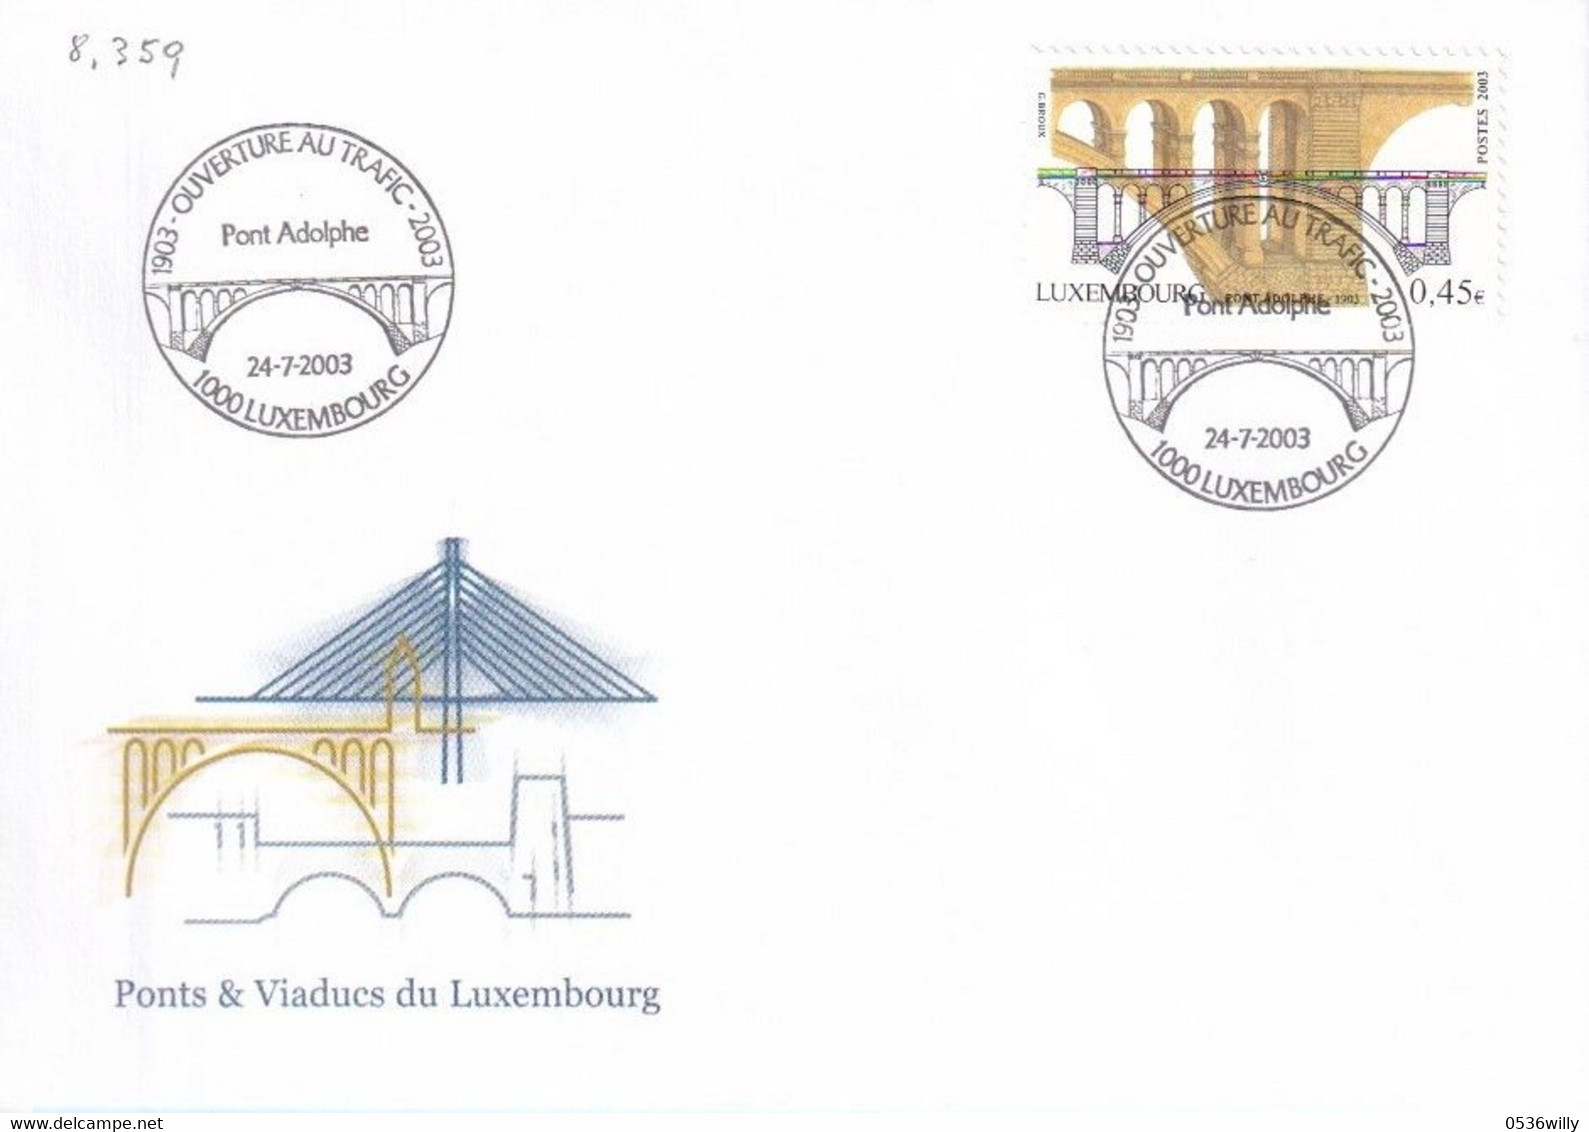 Luxembourg - Pont Adolphe Ouverture Au Trafic  (8.359) - Lettres & Documents